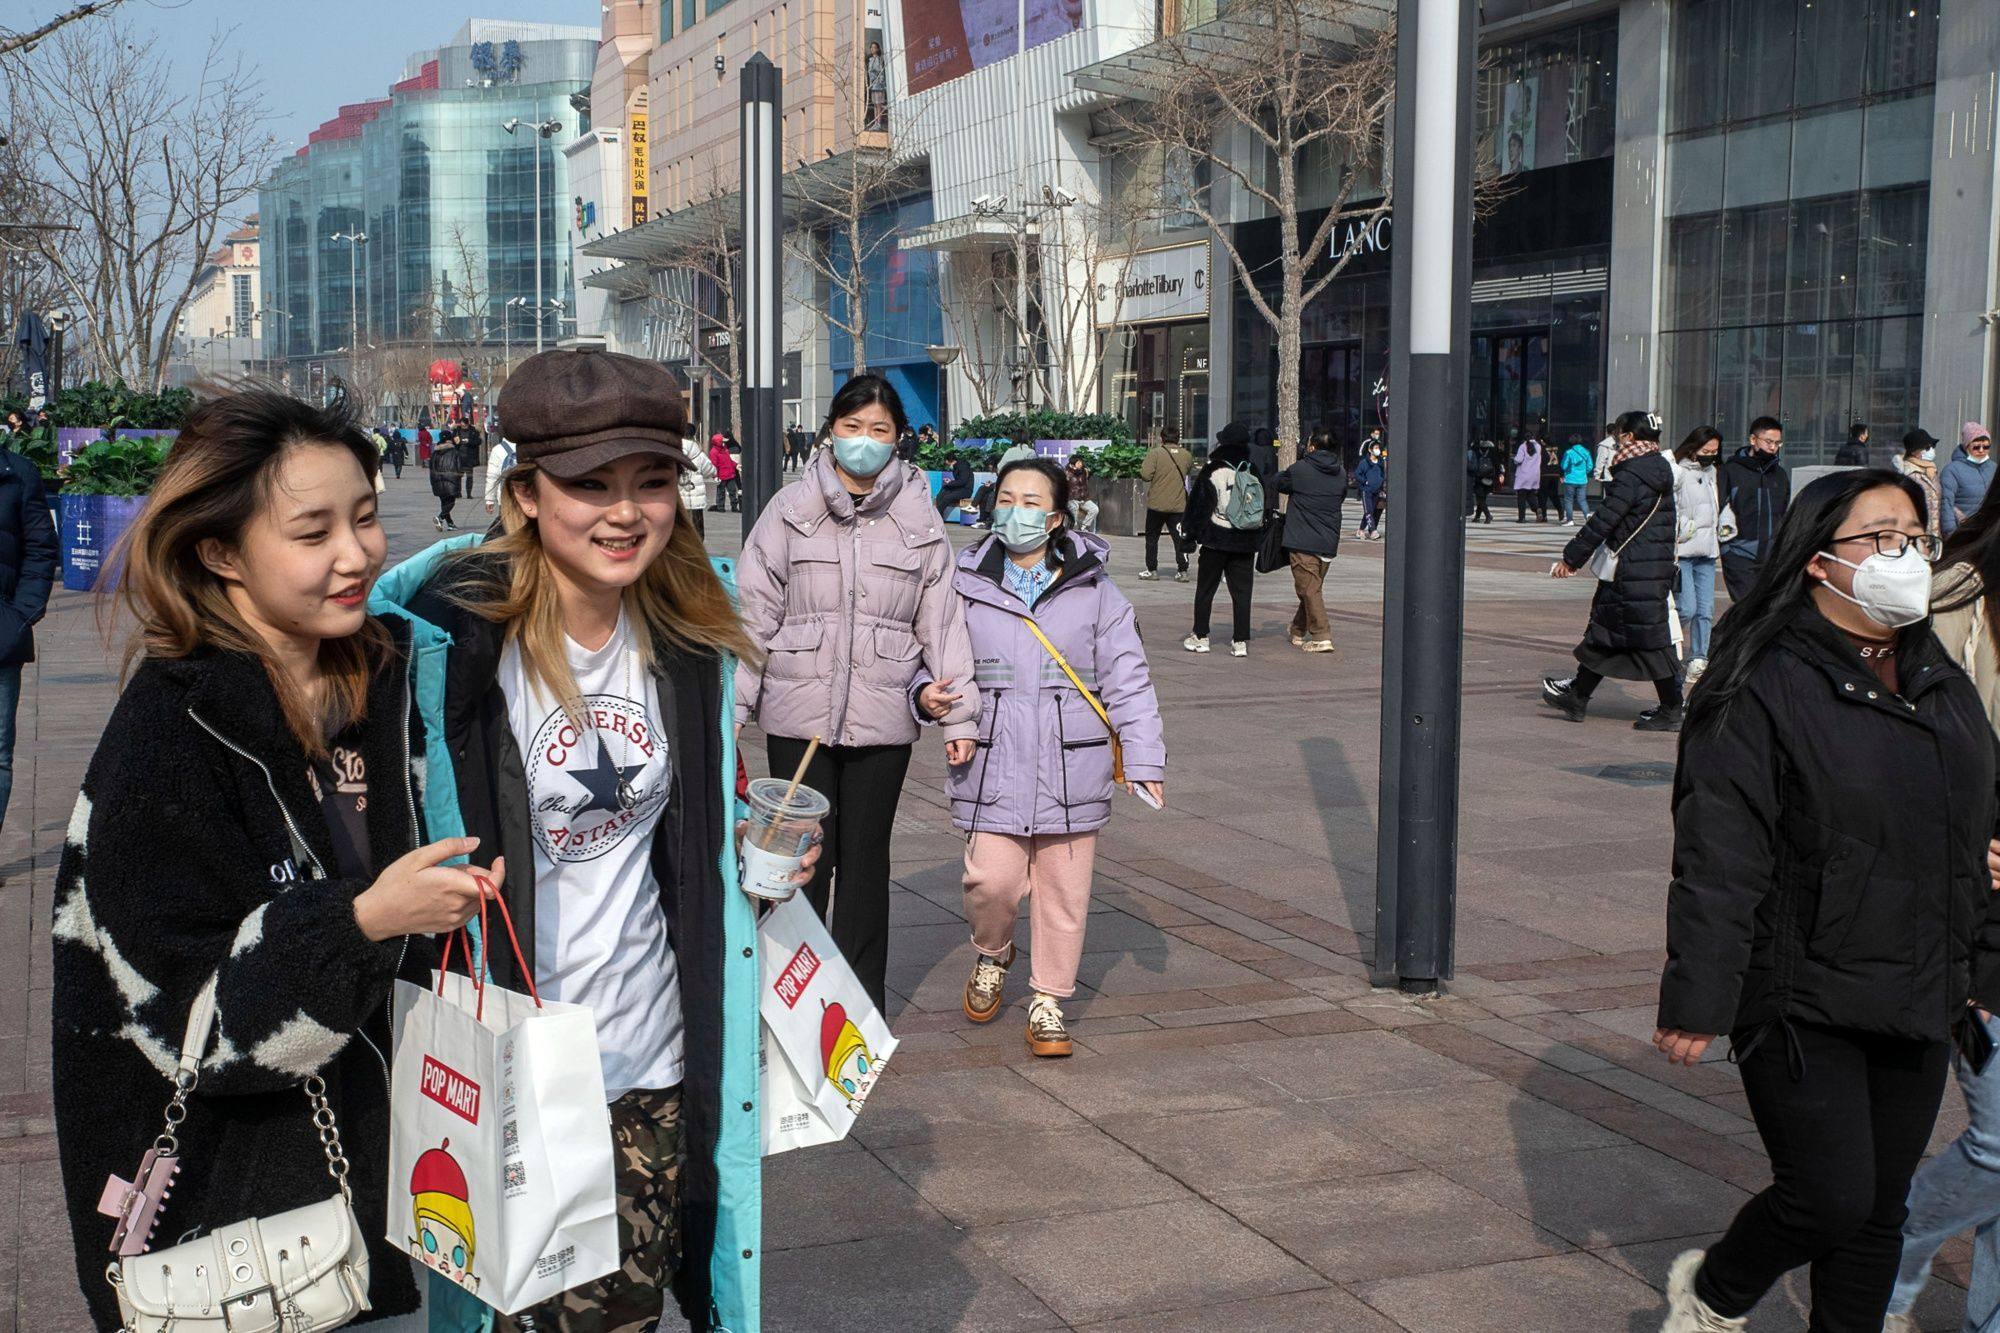 Pedestrians pass through the Wangfujing shopping area in Beijing on February 10. The proliferation of risks and tightening of financial conditions are taking a toll on business and consumer confidence and investment, but China is a bright spot. Photo: Bloomberg